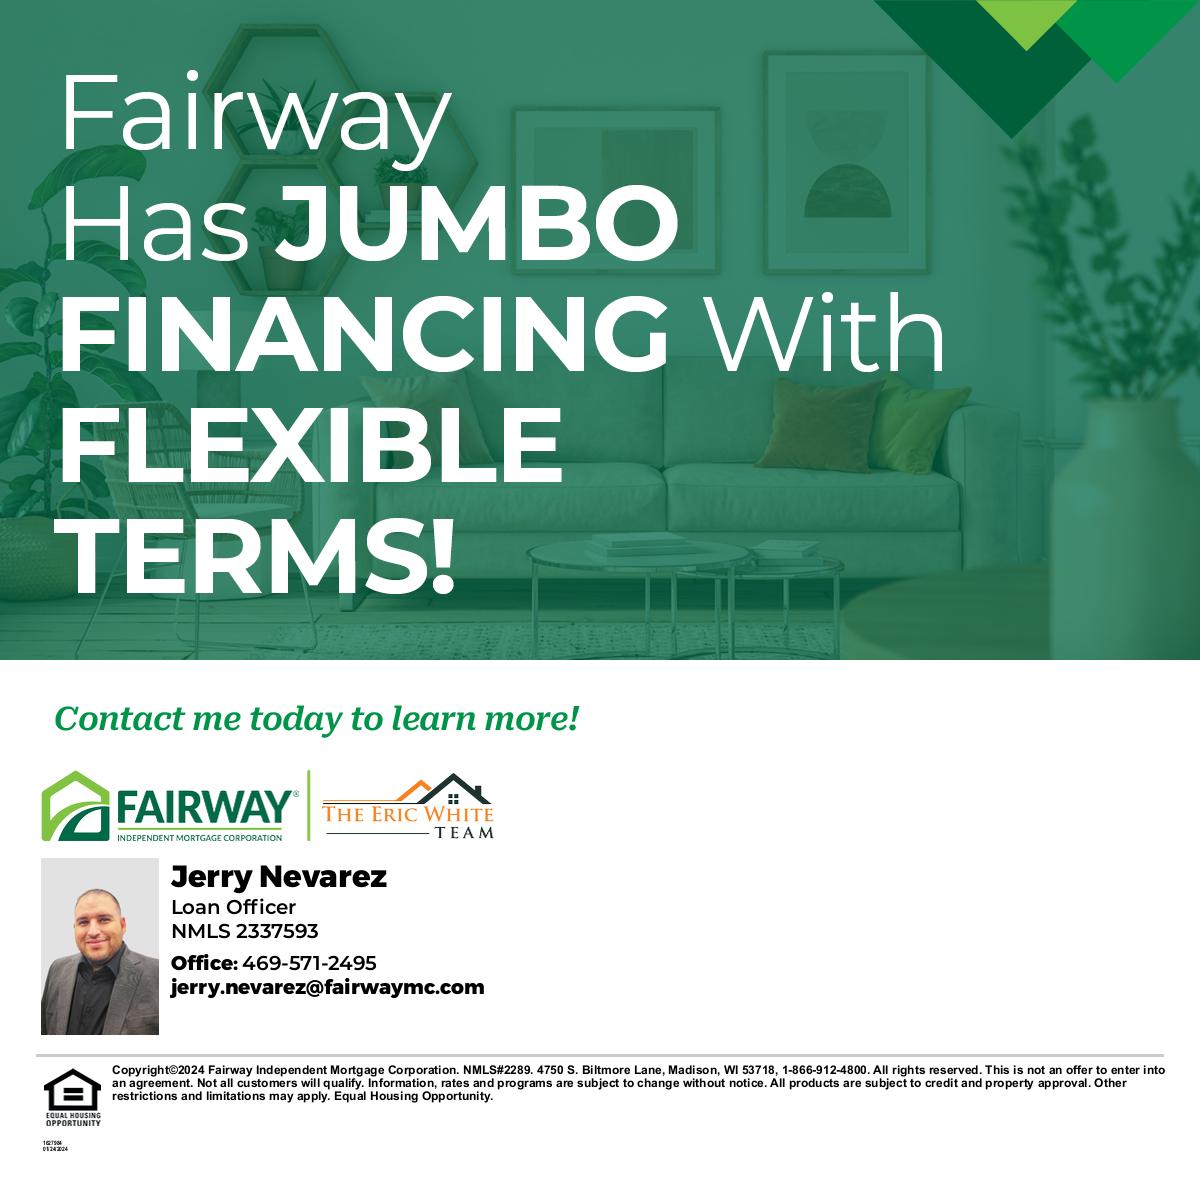 Reach out today to learn more! #jerryloanguy #ownyourhome #realestatefinance #PreApprovalMagic #DreamHomeAwaits #MortgageMatters #YourLoanExpert mobile.fairwaynow.com/homehub/signup…